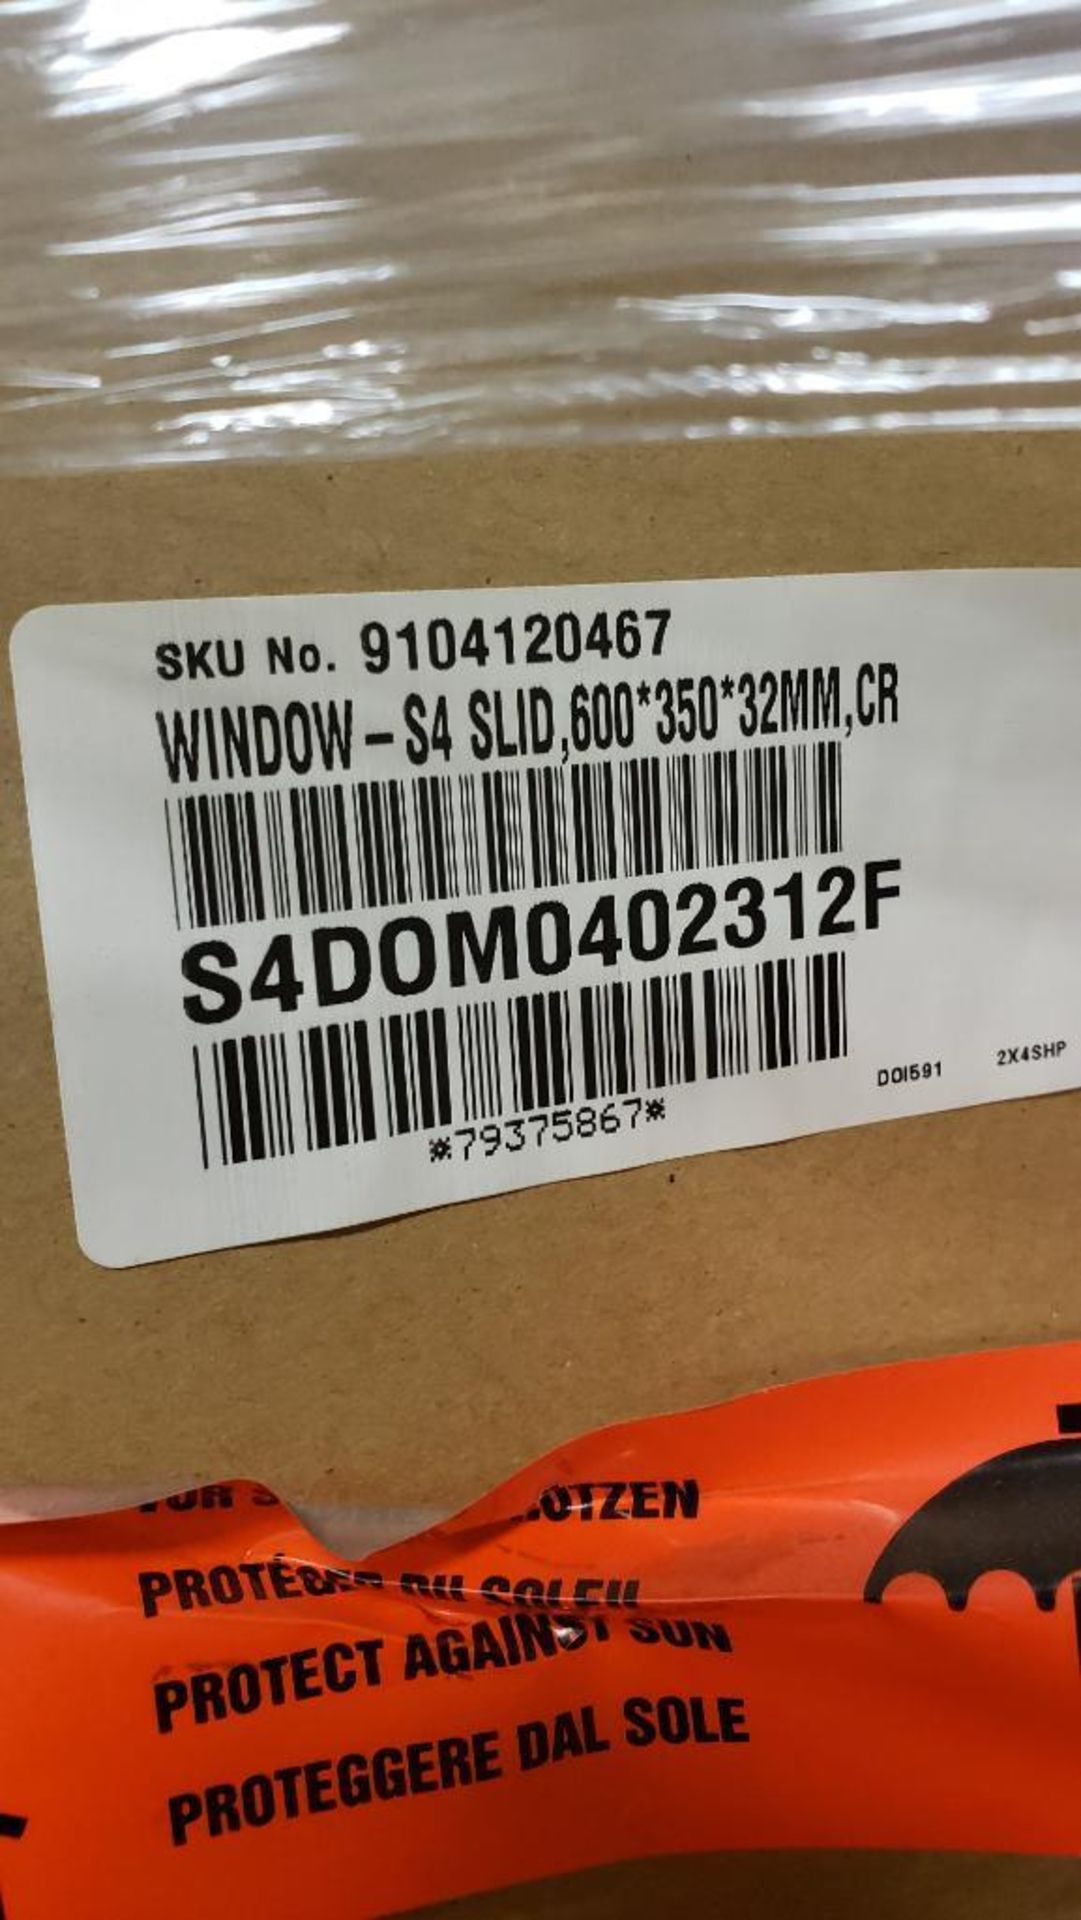 Qty 31 - Dometic window. Part number S4DOM0402312F. New in box. - Image 3 of 3